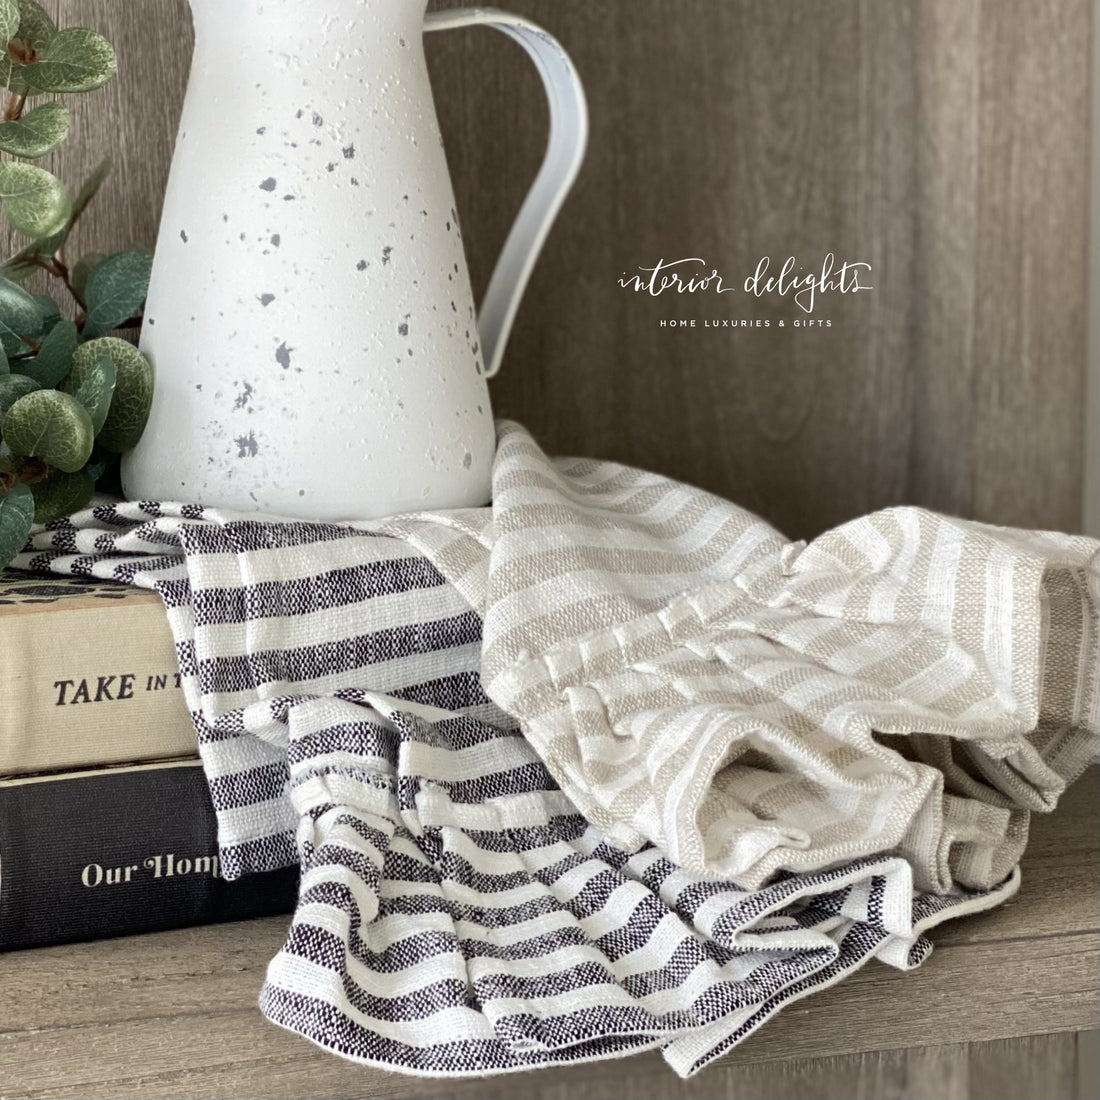 Striped Ruffle Towels-Set of Two - Interior Delights